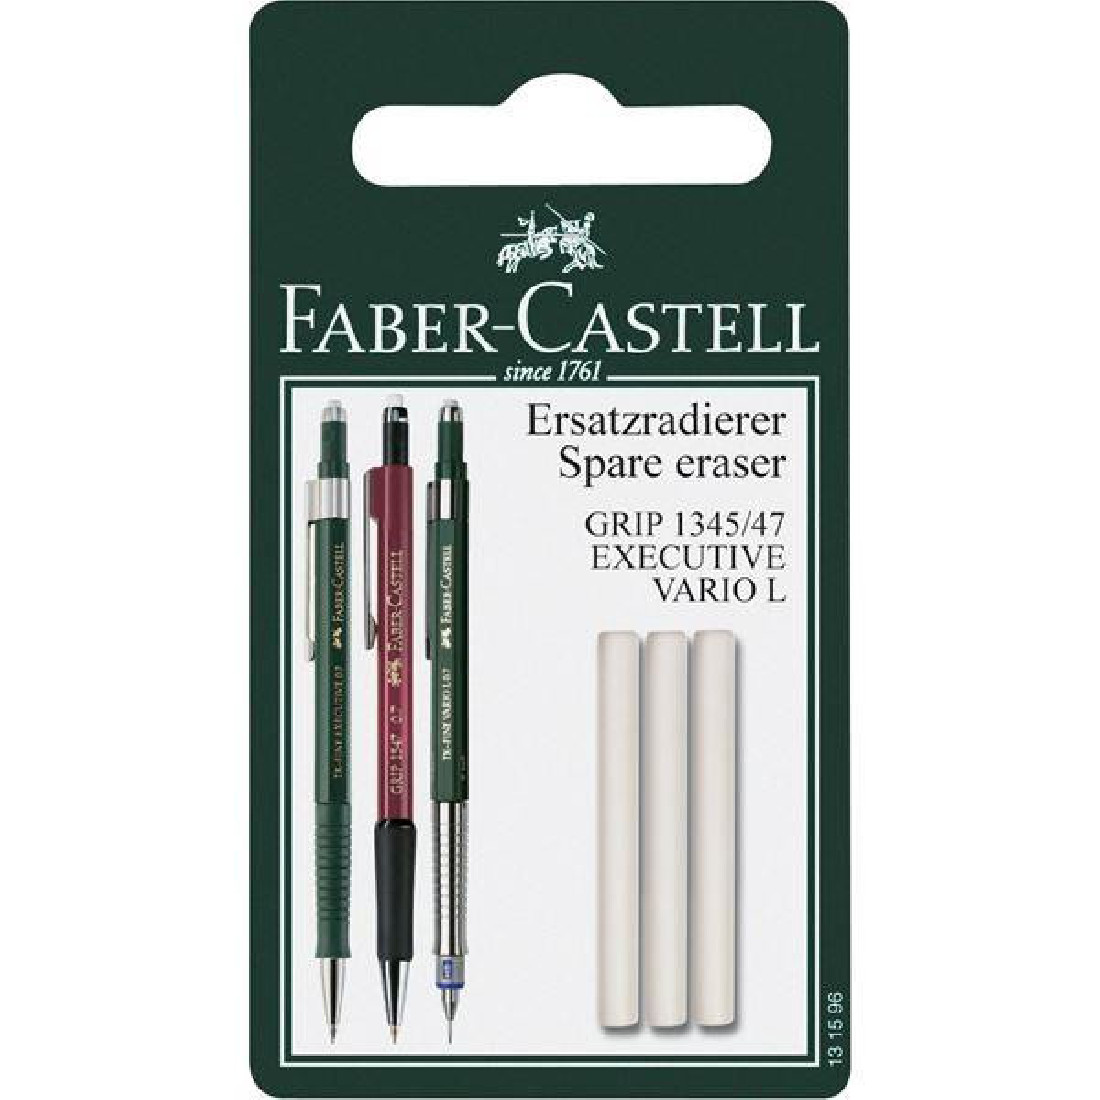 Faber Castell Grip 1345/47 spare erasers for mechanical pencil, set of 3, 131596